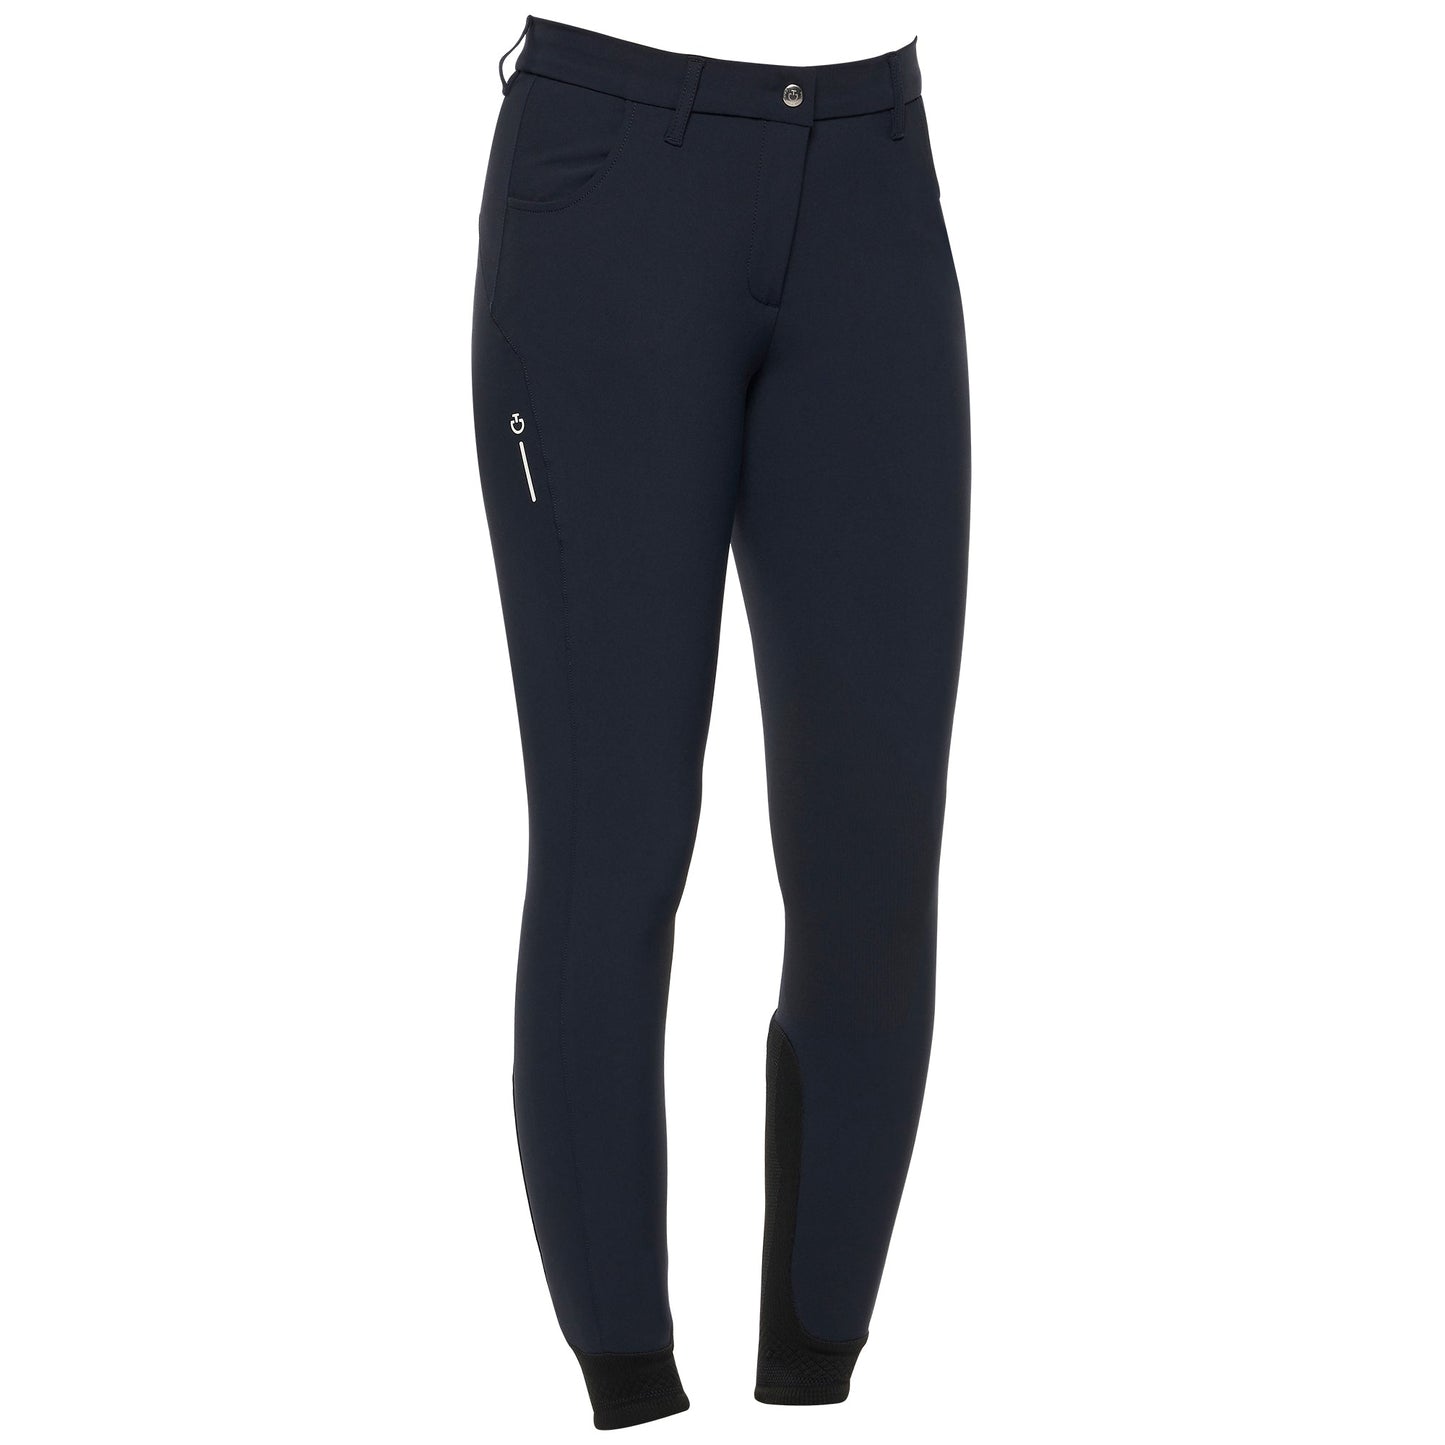 Cavalleria Toscana Revolution Knee Grip Breeches-Trailrace Equestrian Outfitters-The Equestrian